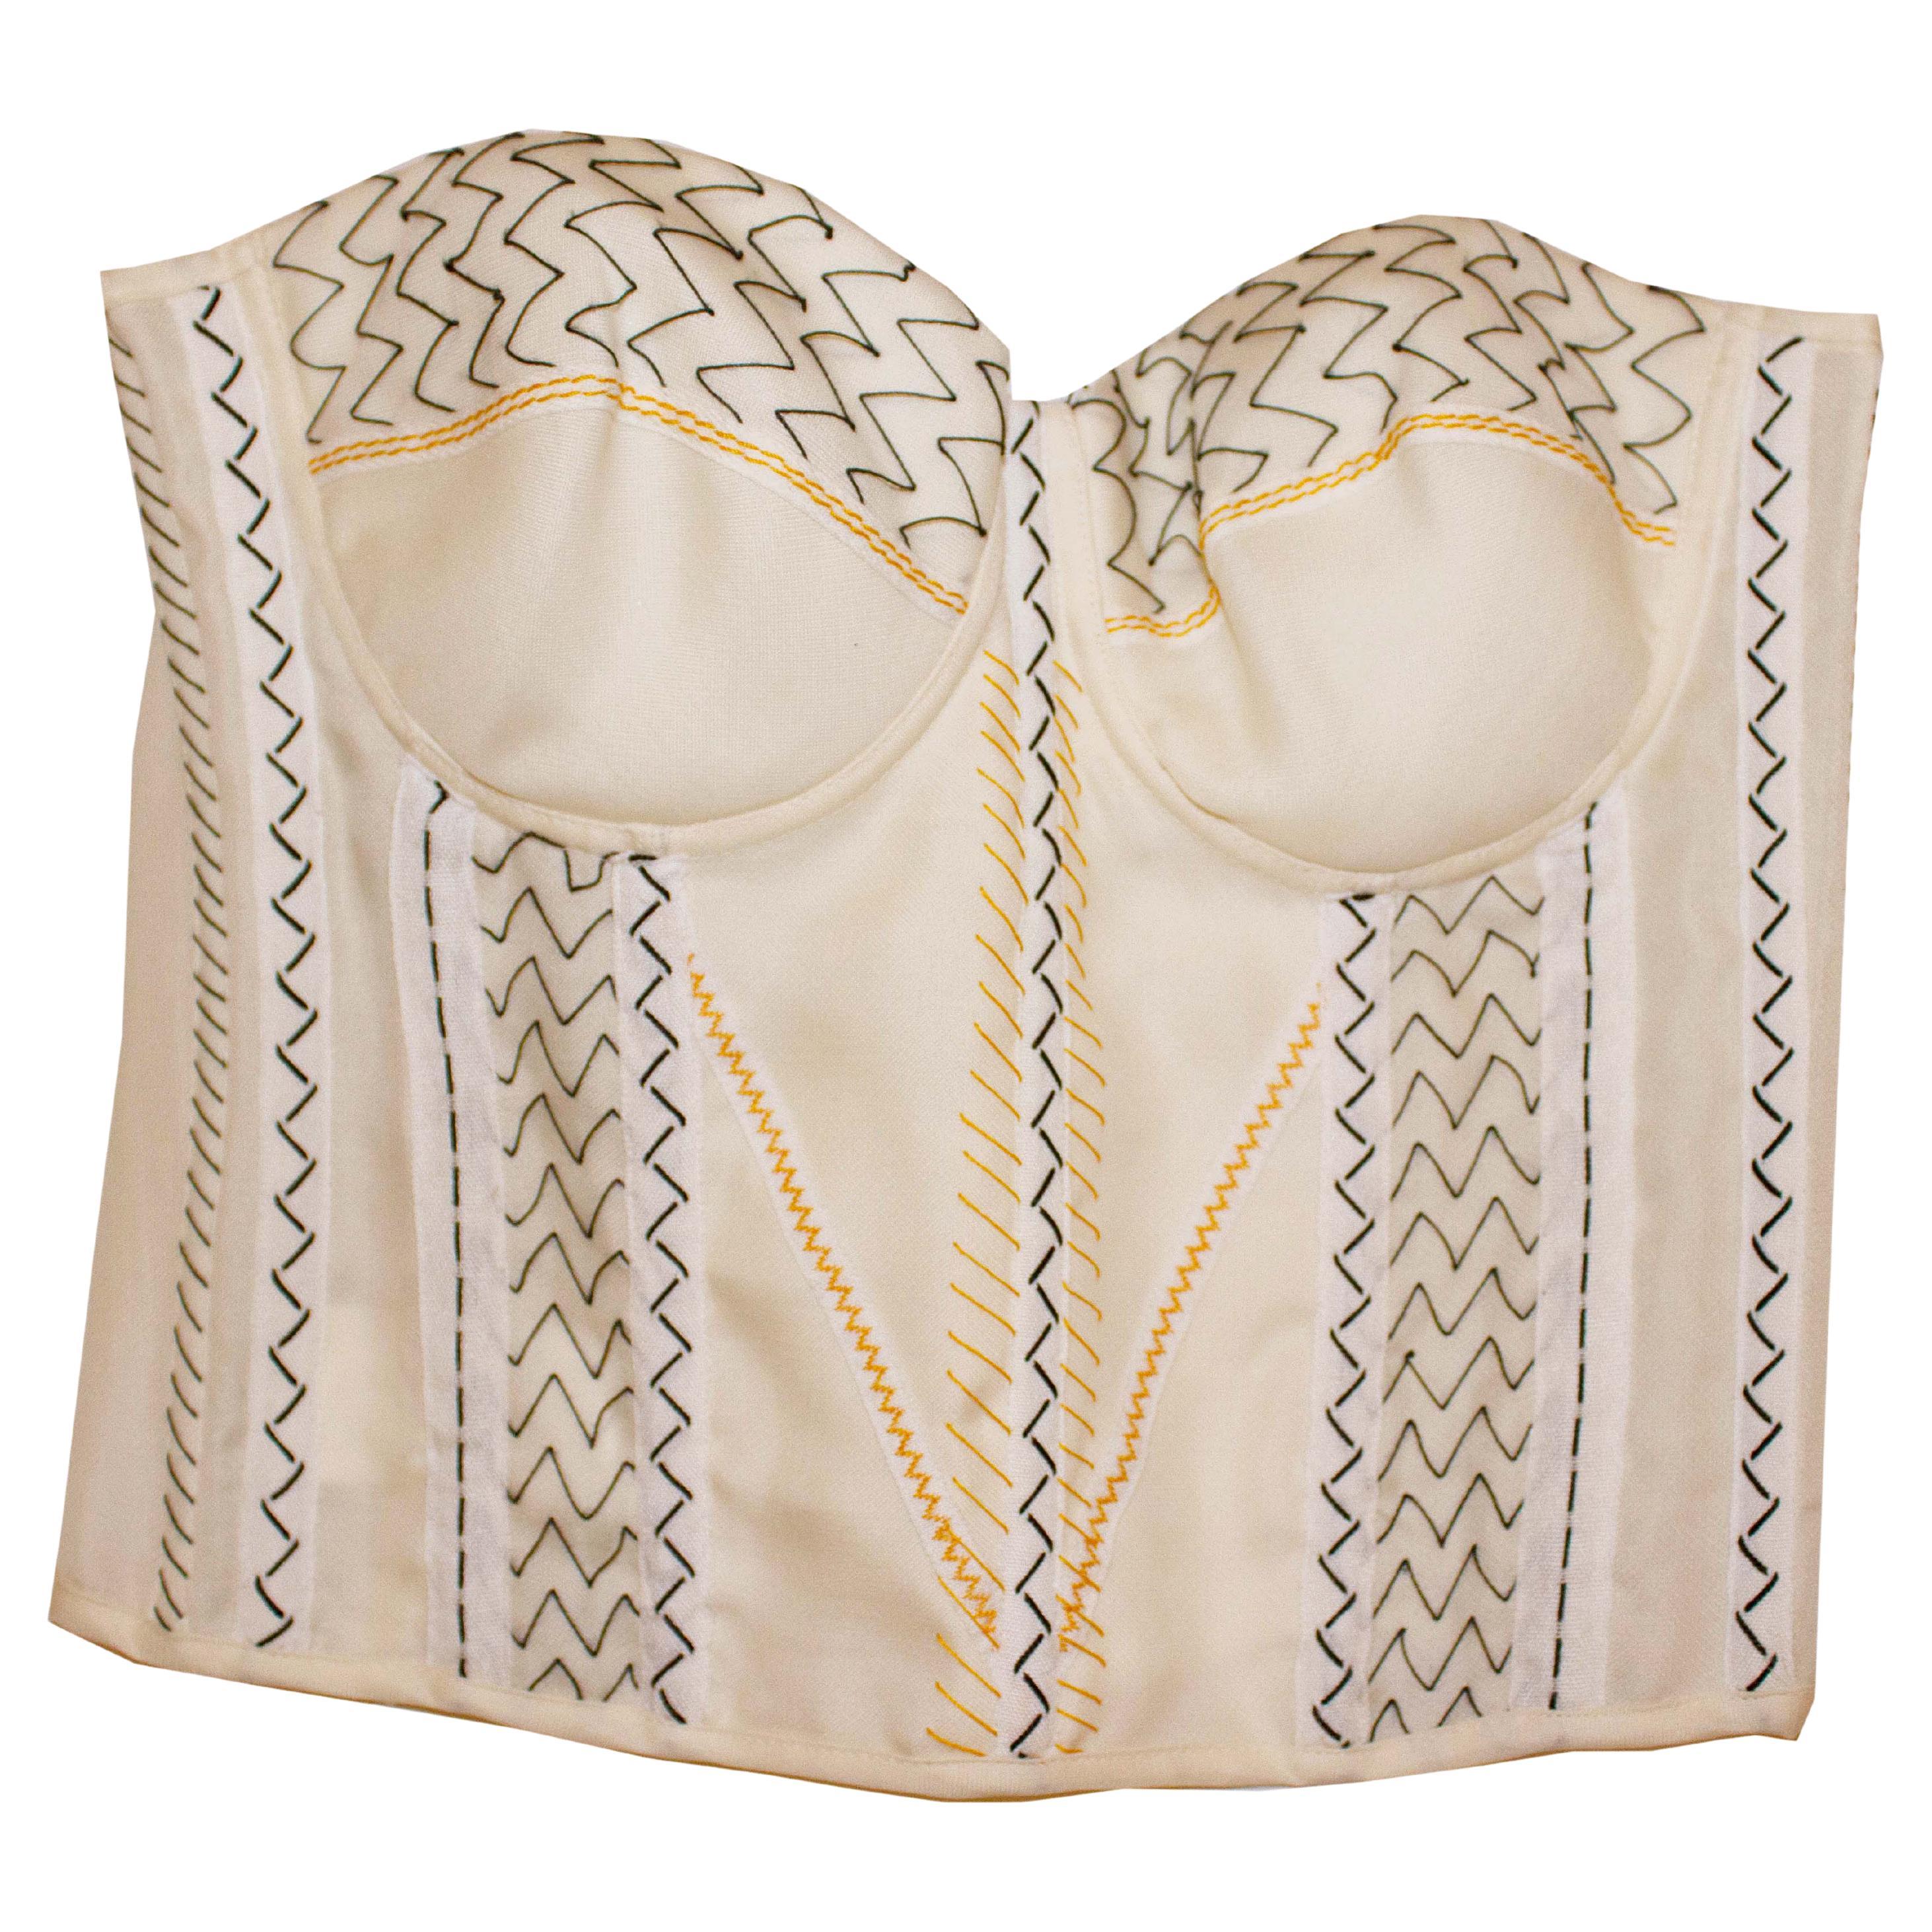 GianFranco Ferre Corset Top with Pretty Stitching